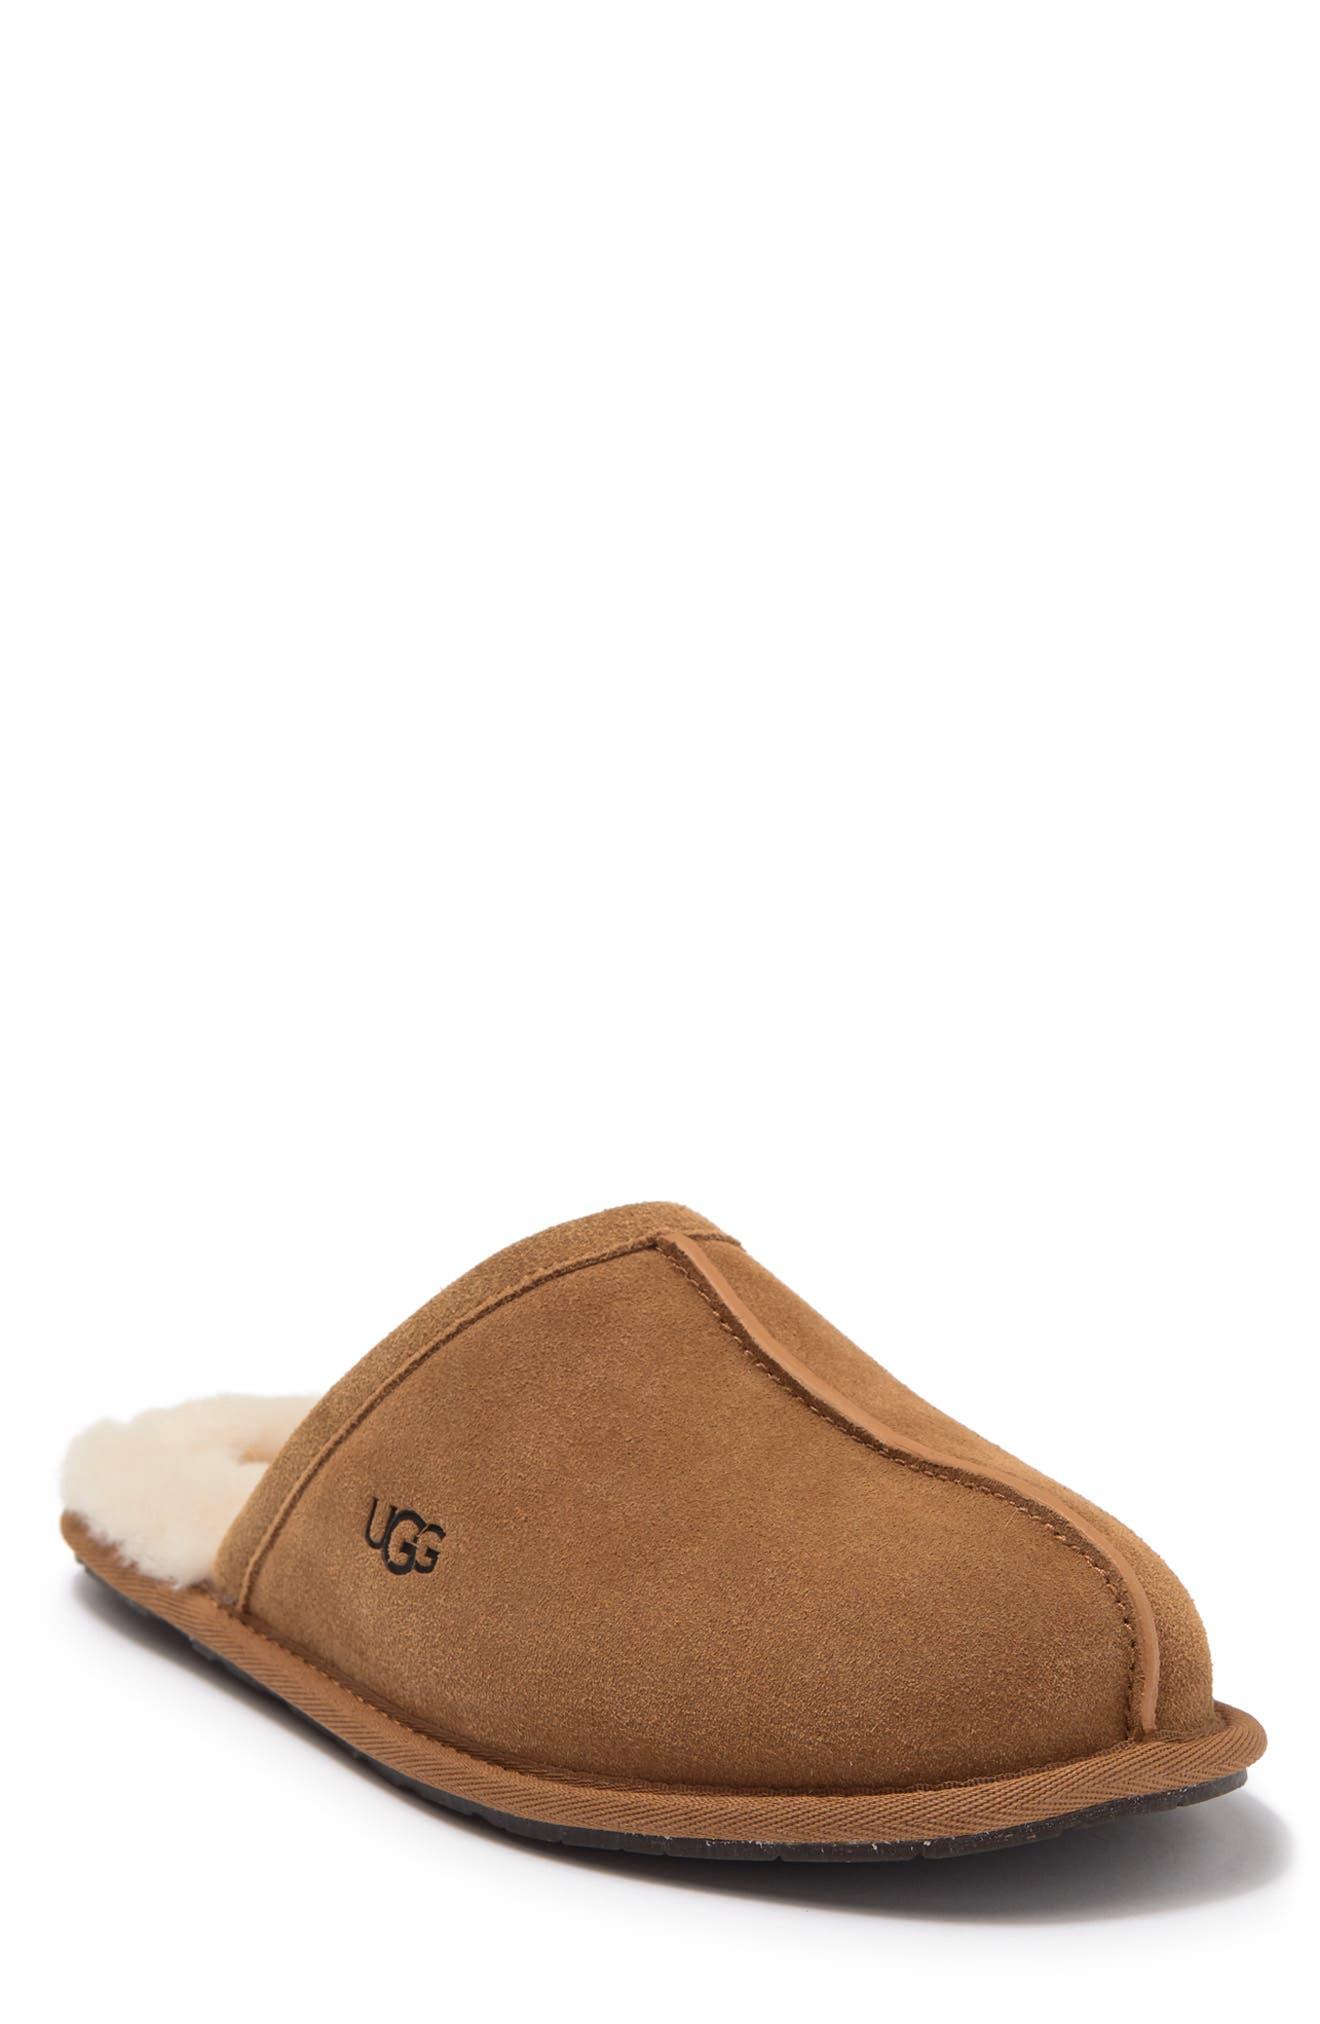 UGG Pearle Faux Fur Lined Scuff Slipper in Brown | Lyst